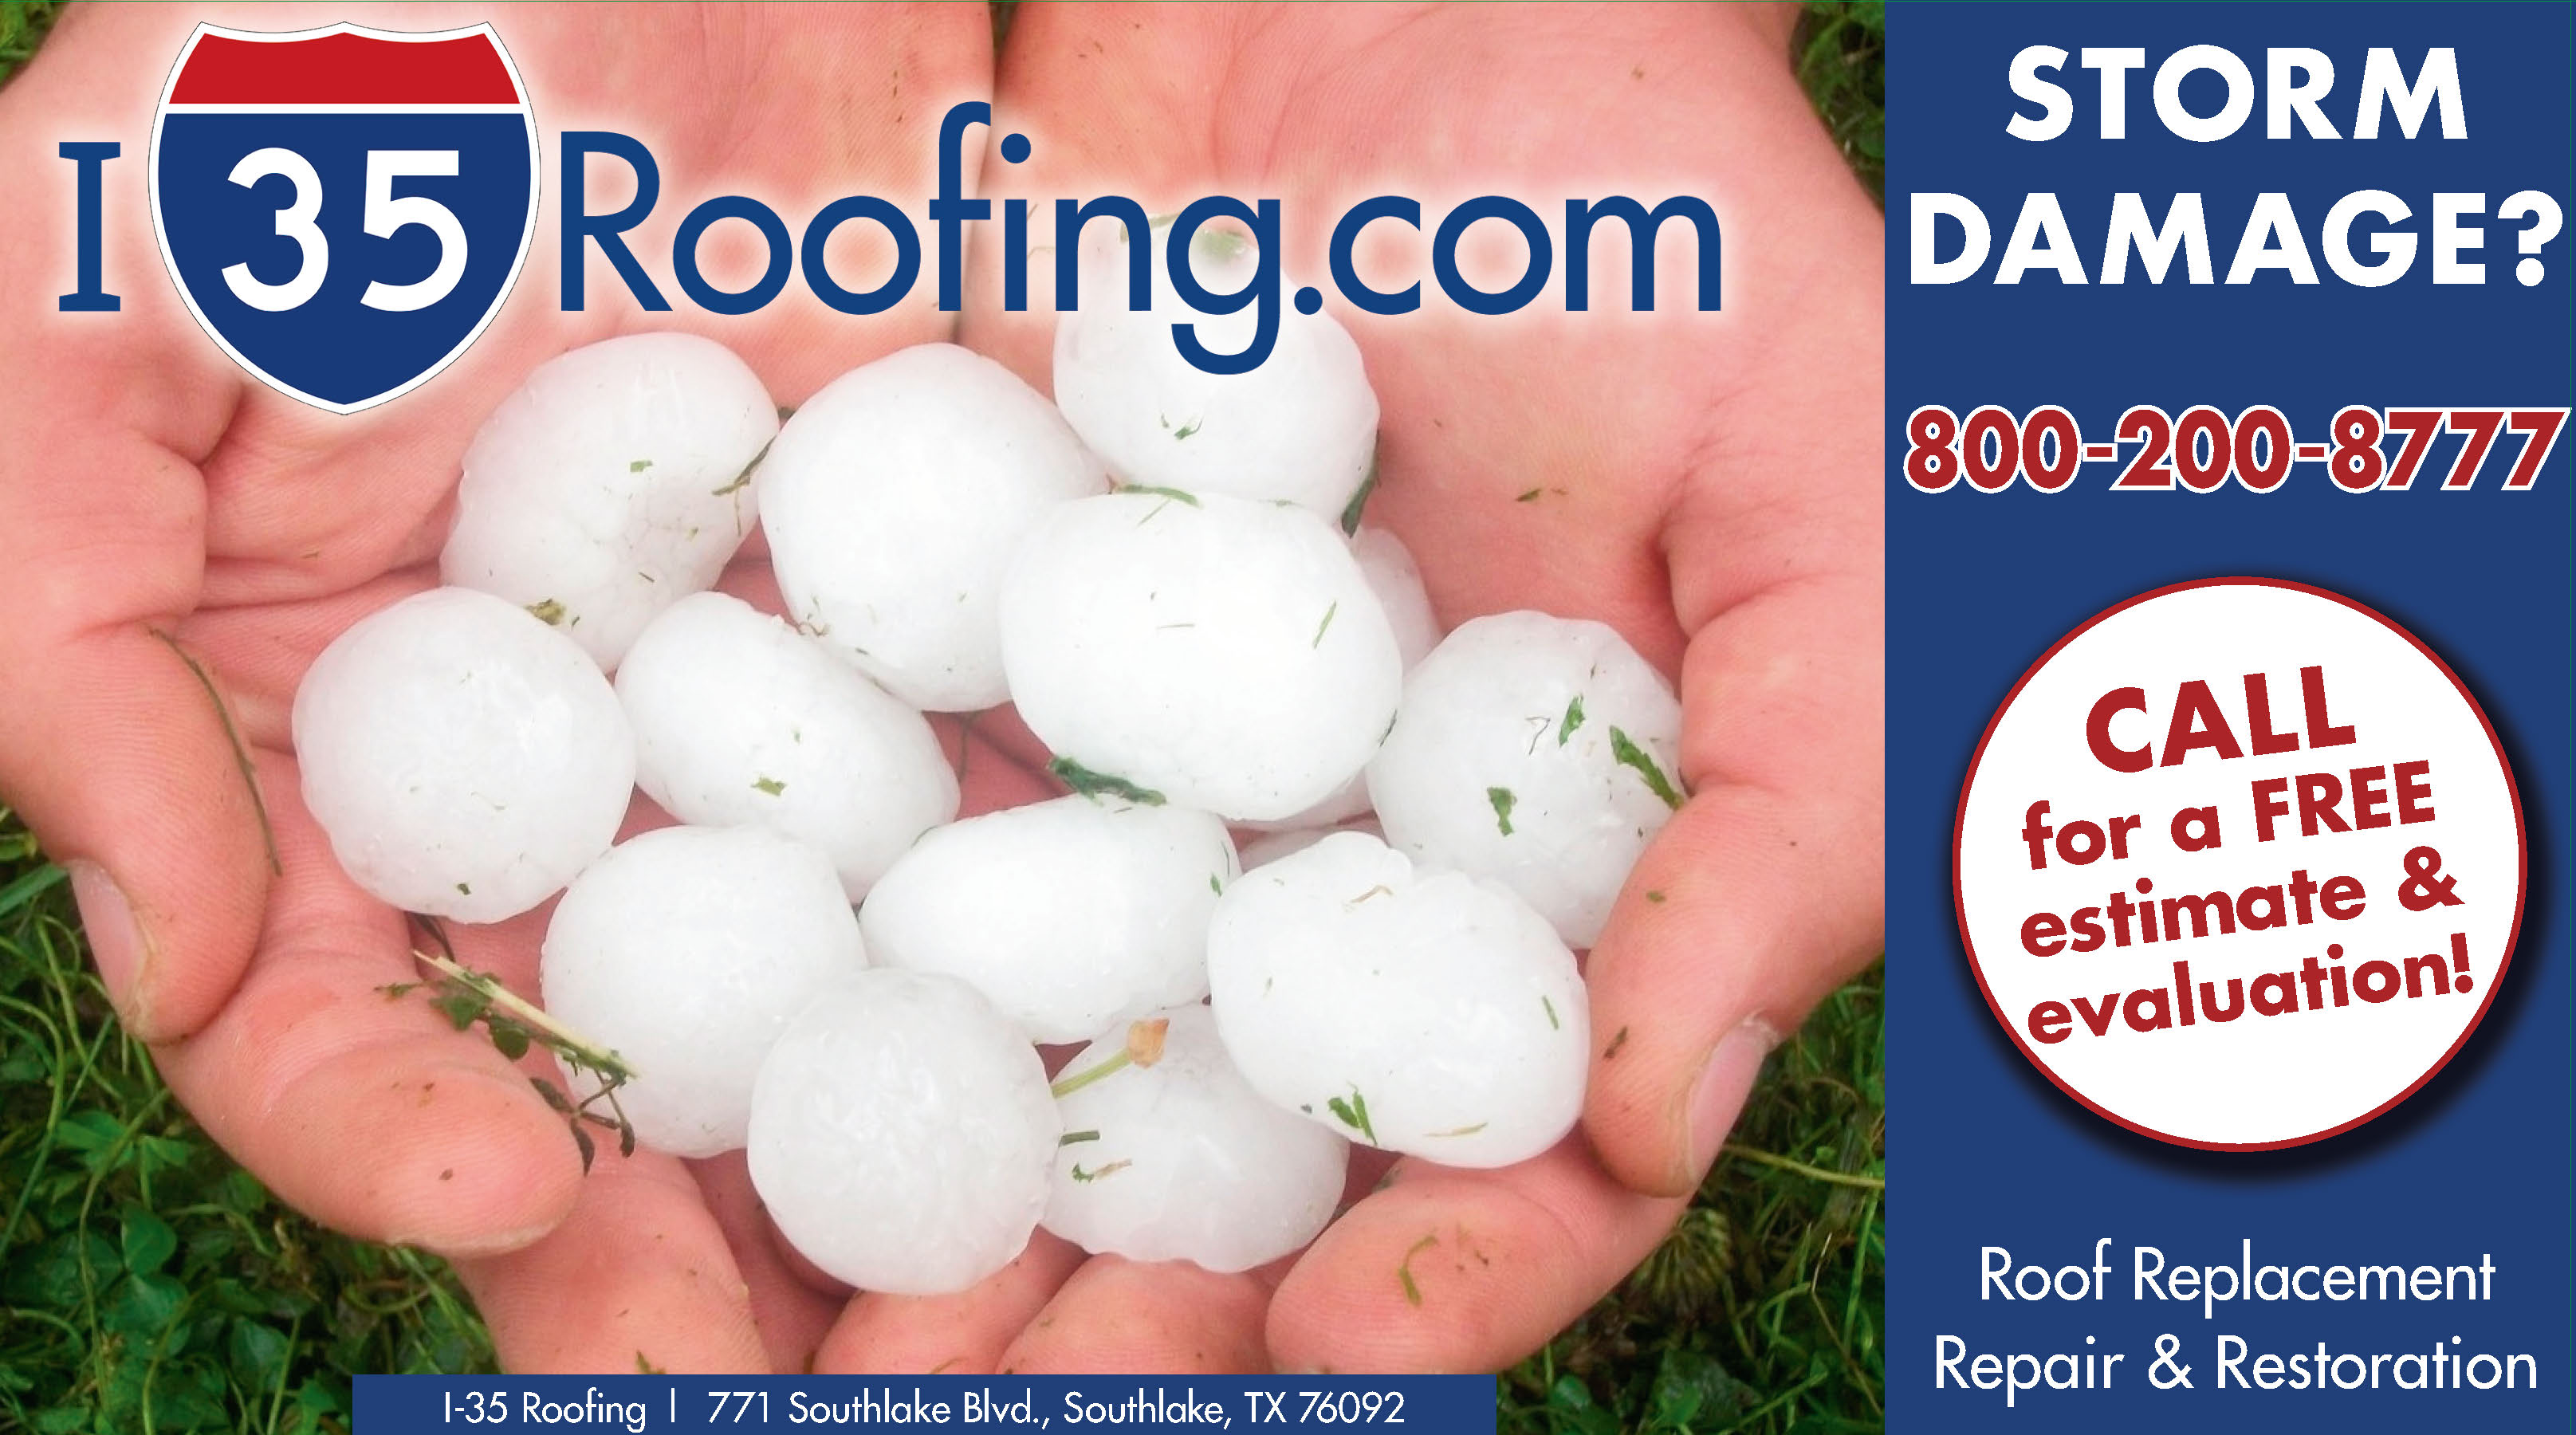 Hail and Storm Damage - I35 Roofing